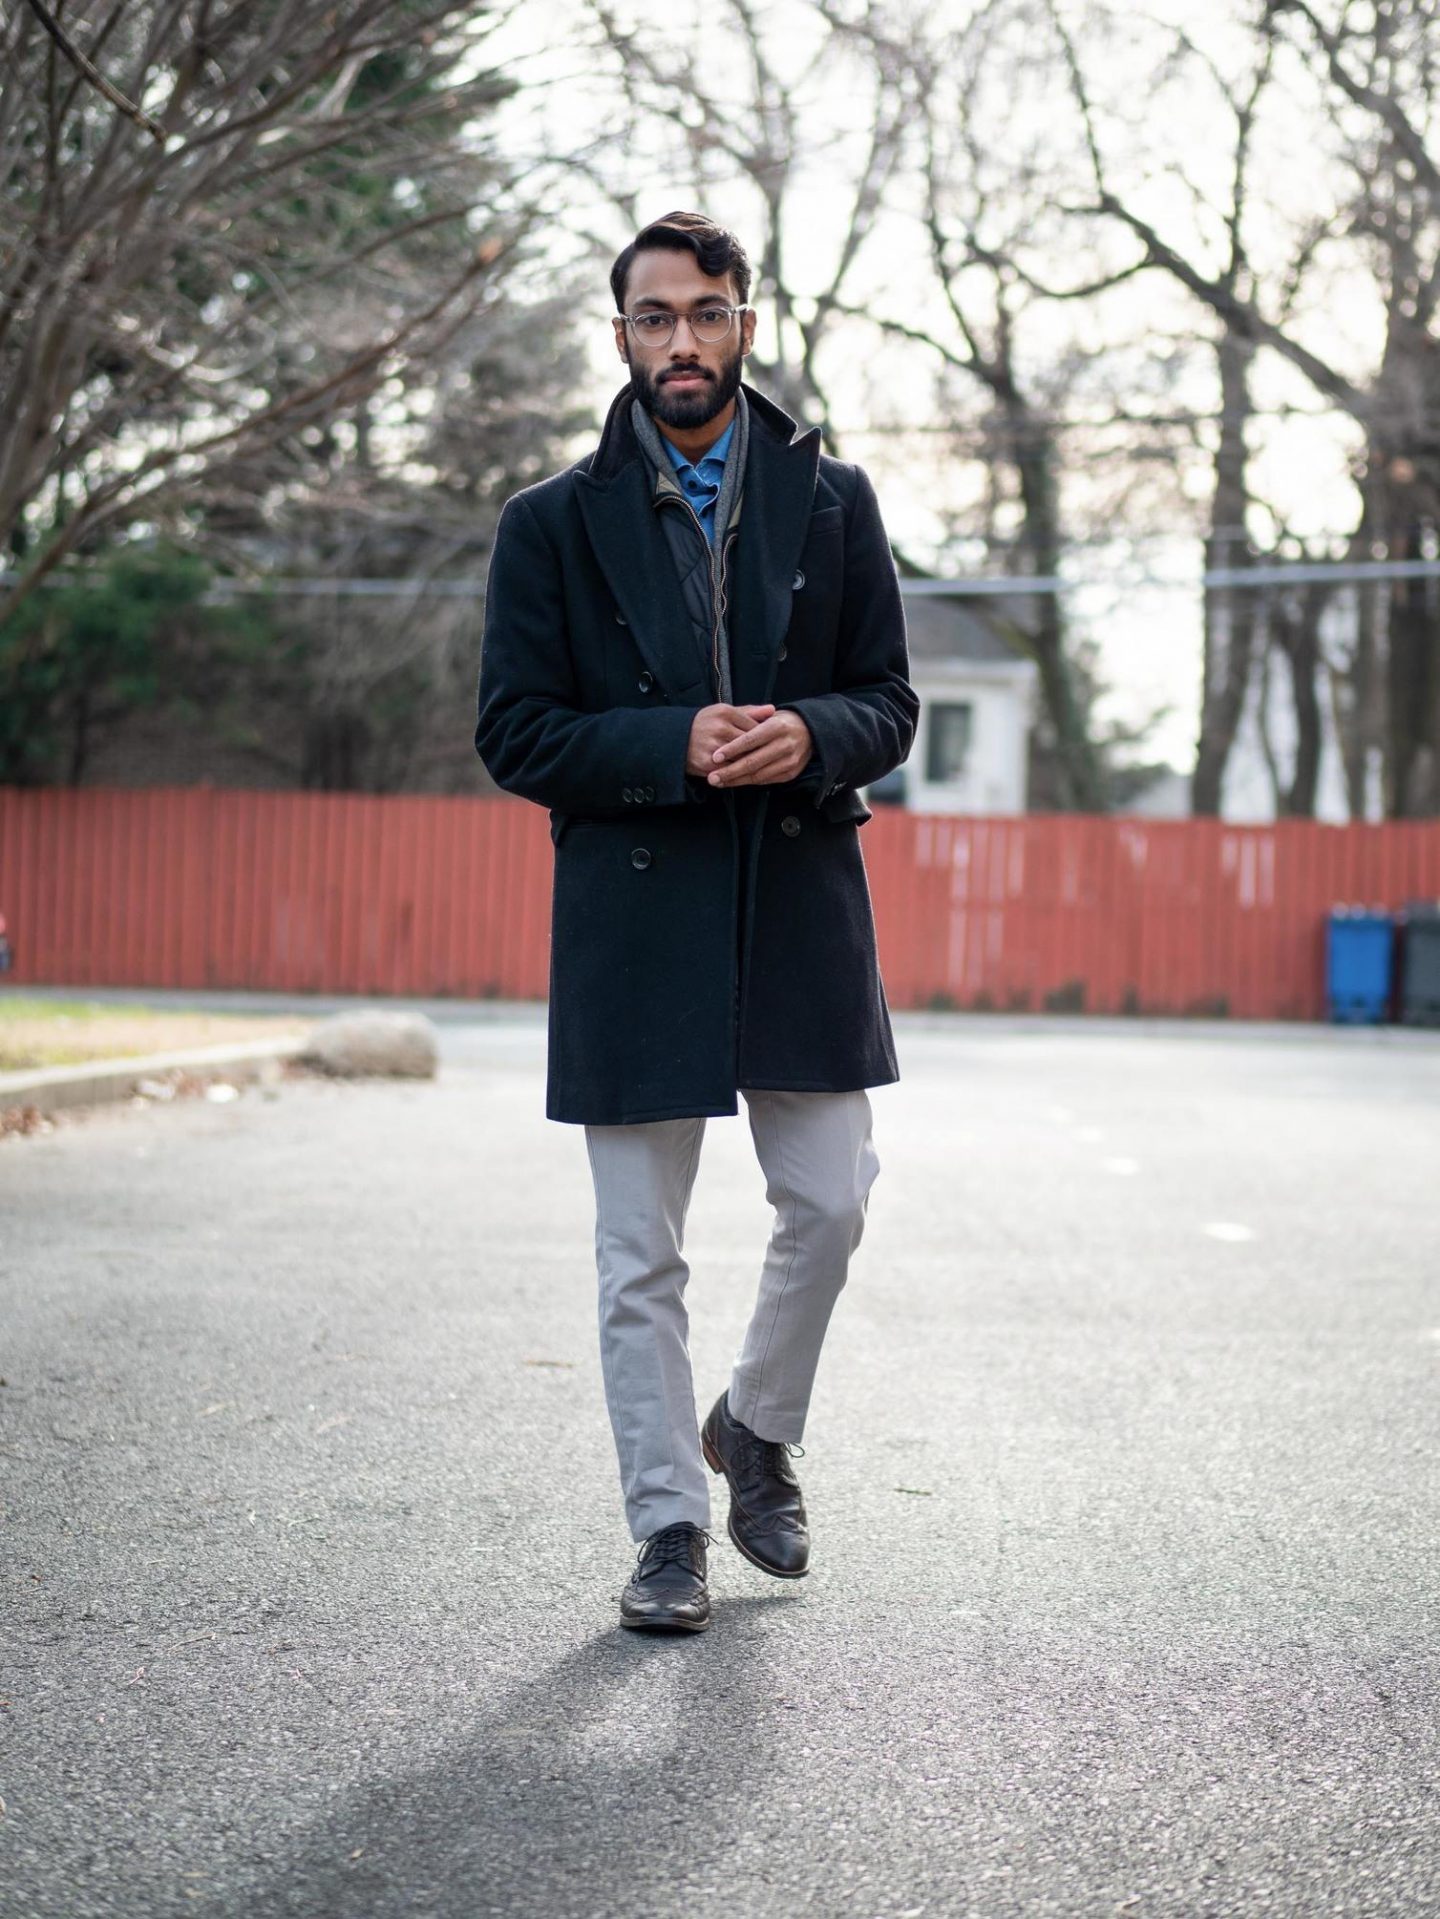 How To Wear a Suit in the Extreme Cold - The Modest Man